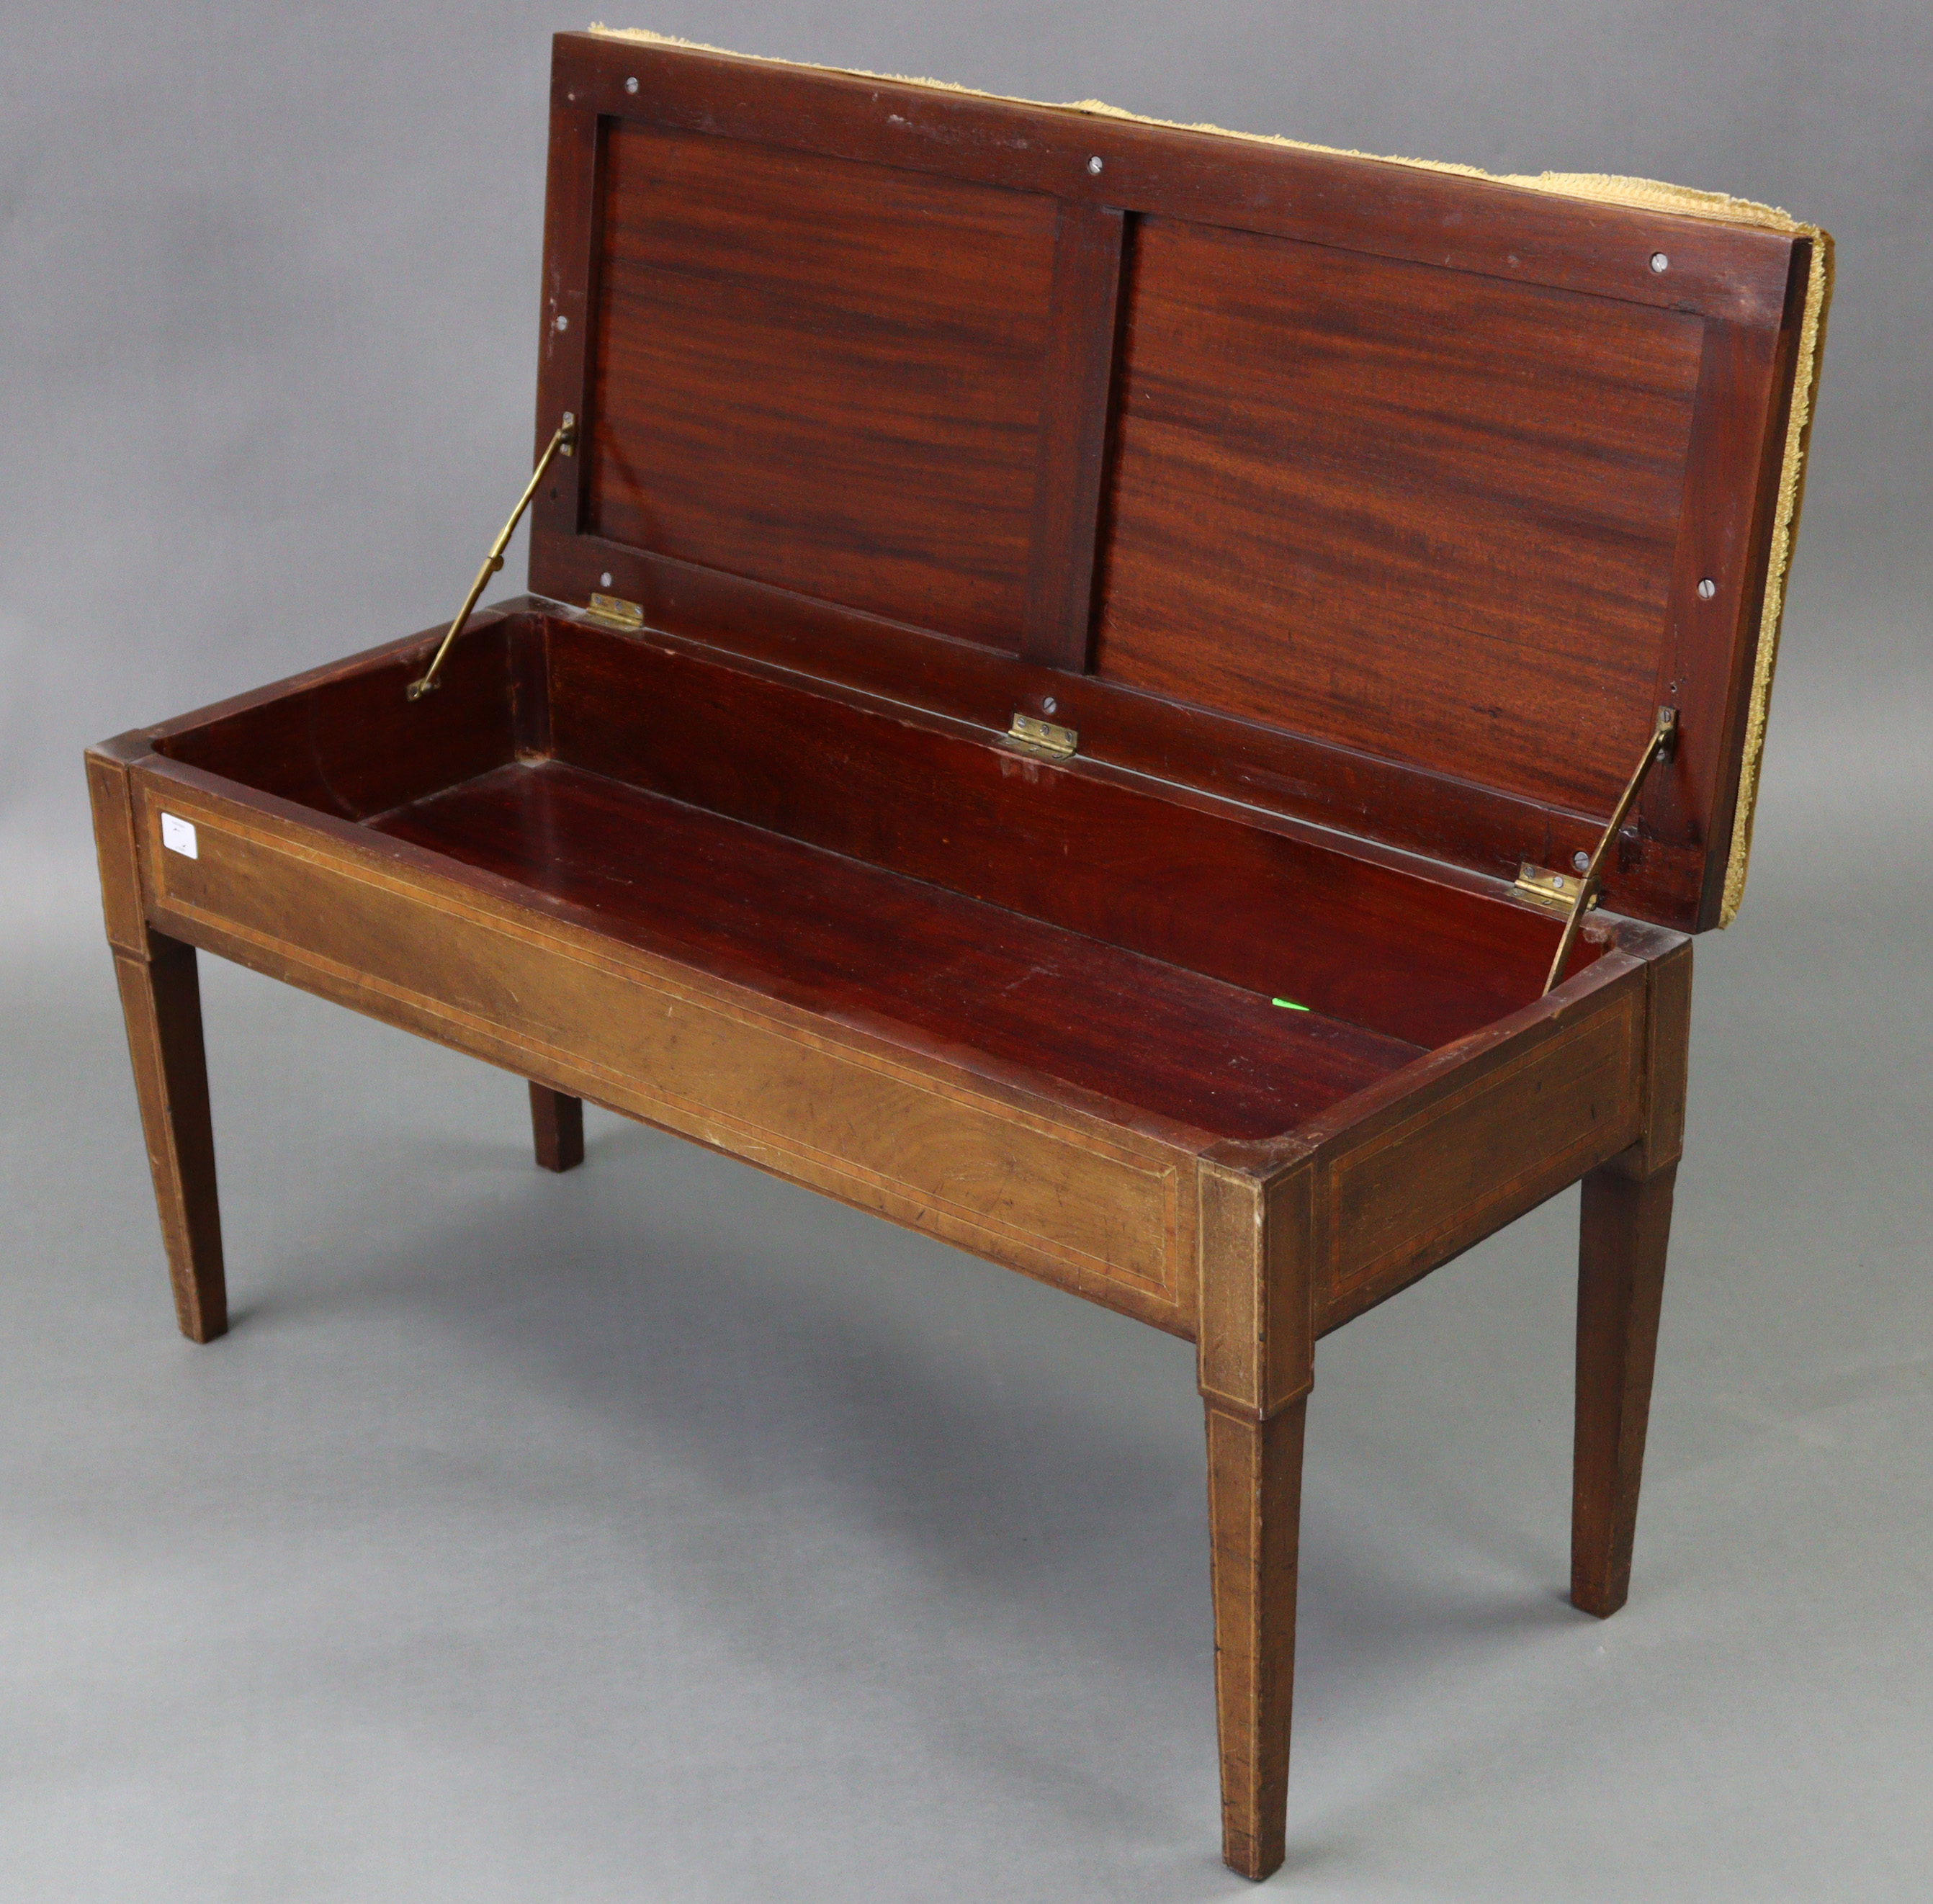 A pair of late 19th/early 20th century inlaid-mahogany splat-back occasional chairs with padded - Image 3 of 3